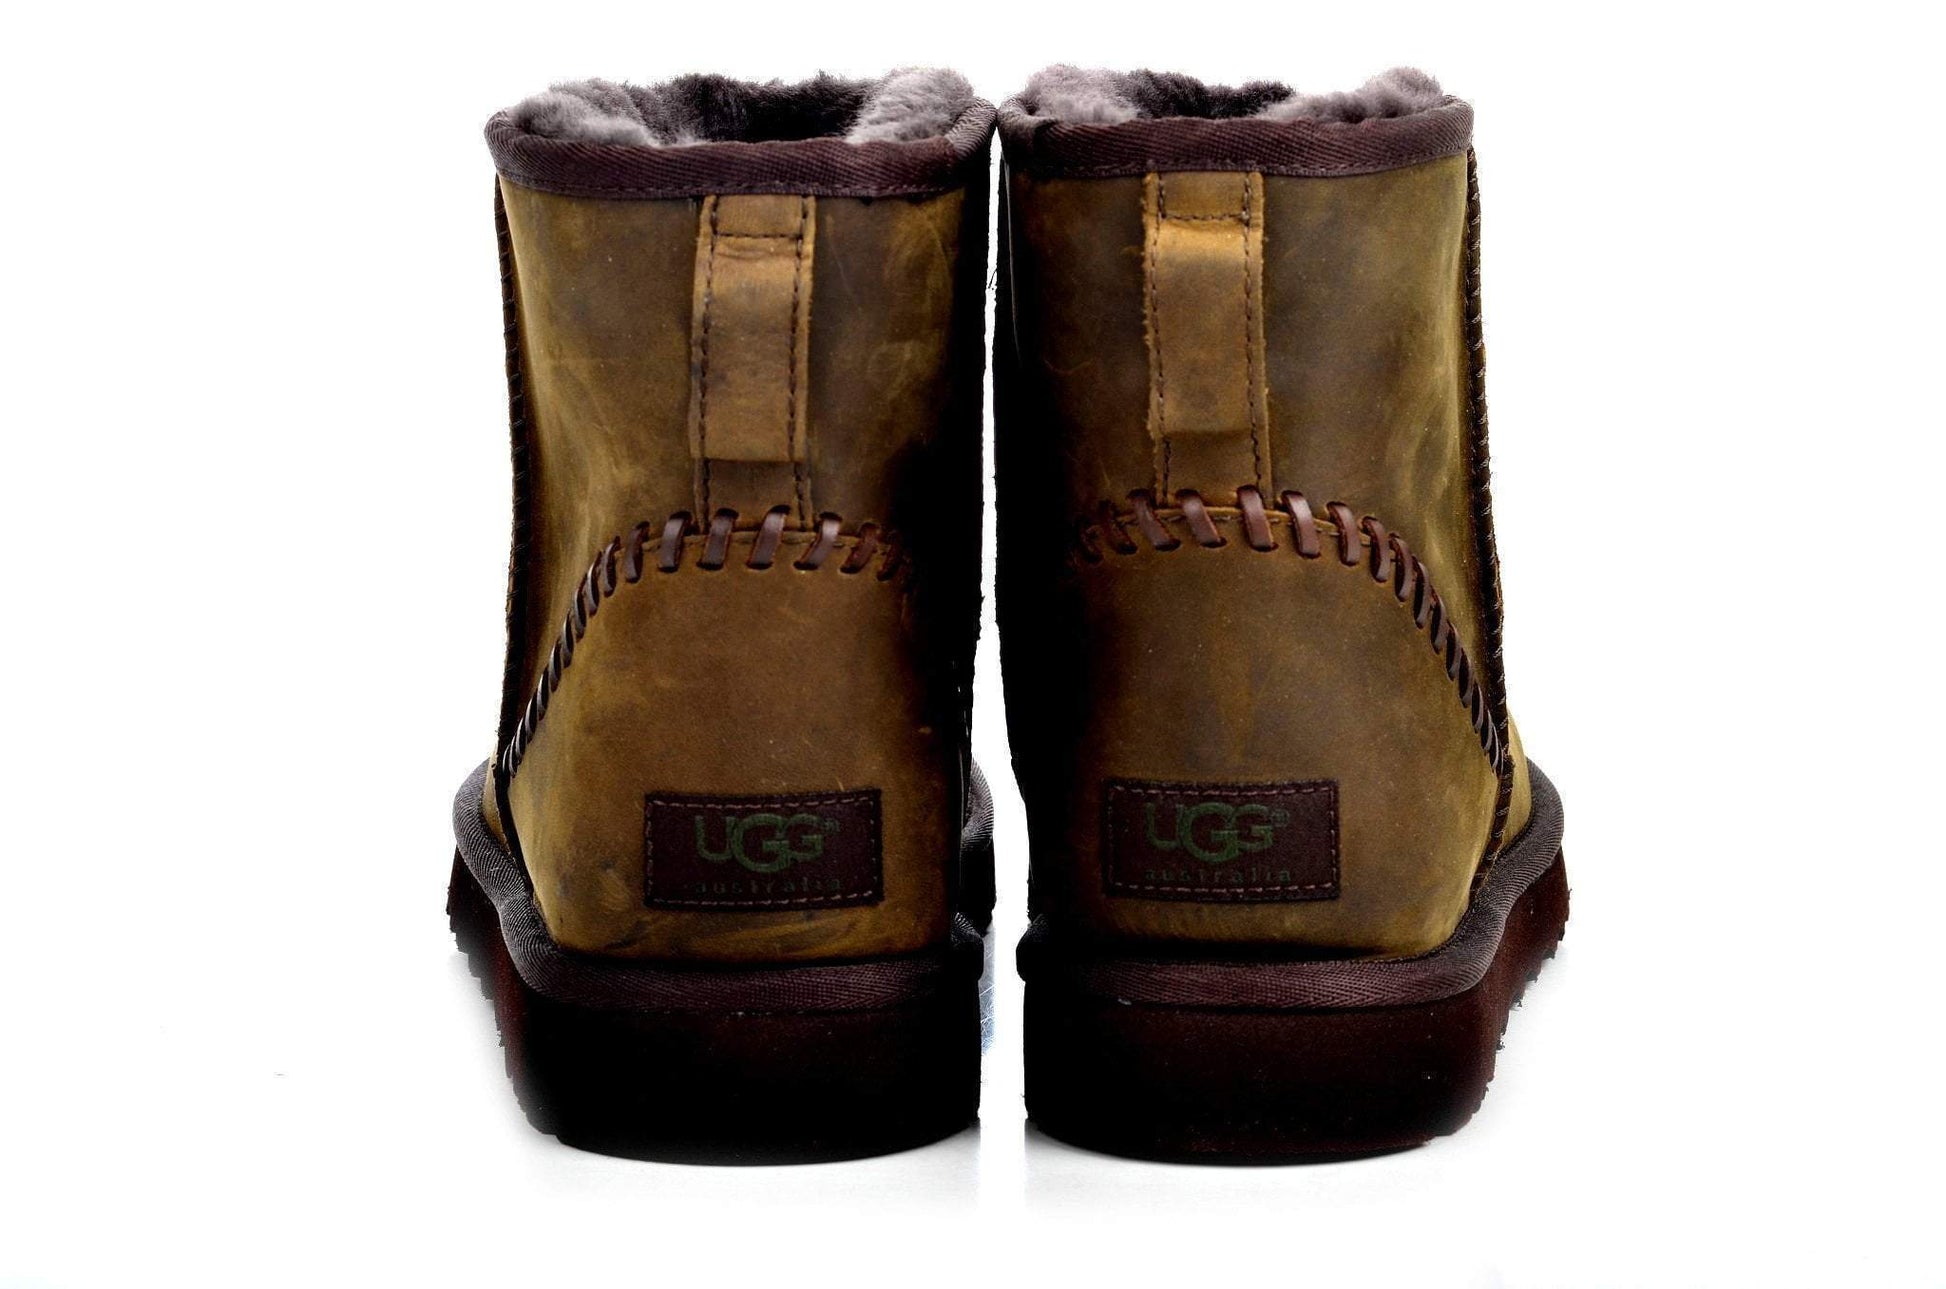 Bootland Boots Warm Low Boots